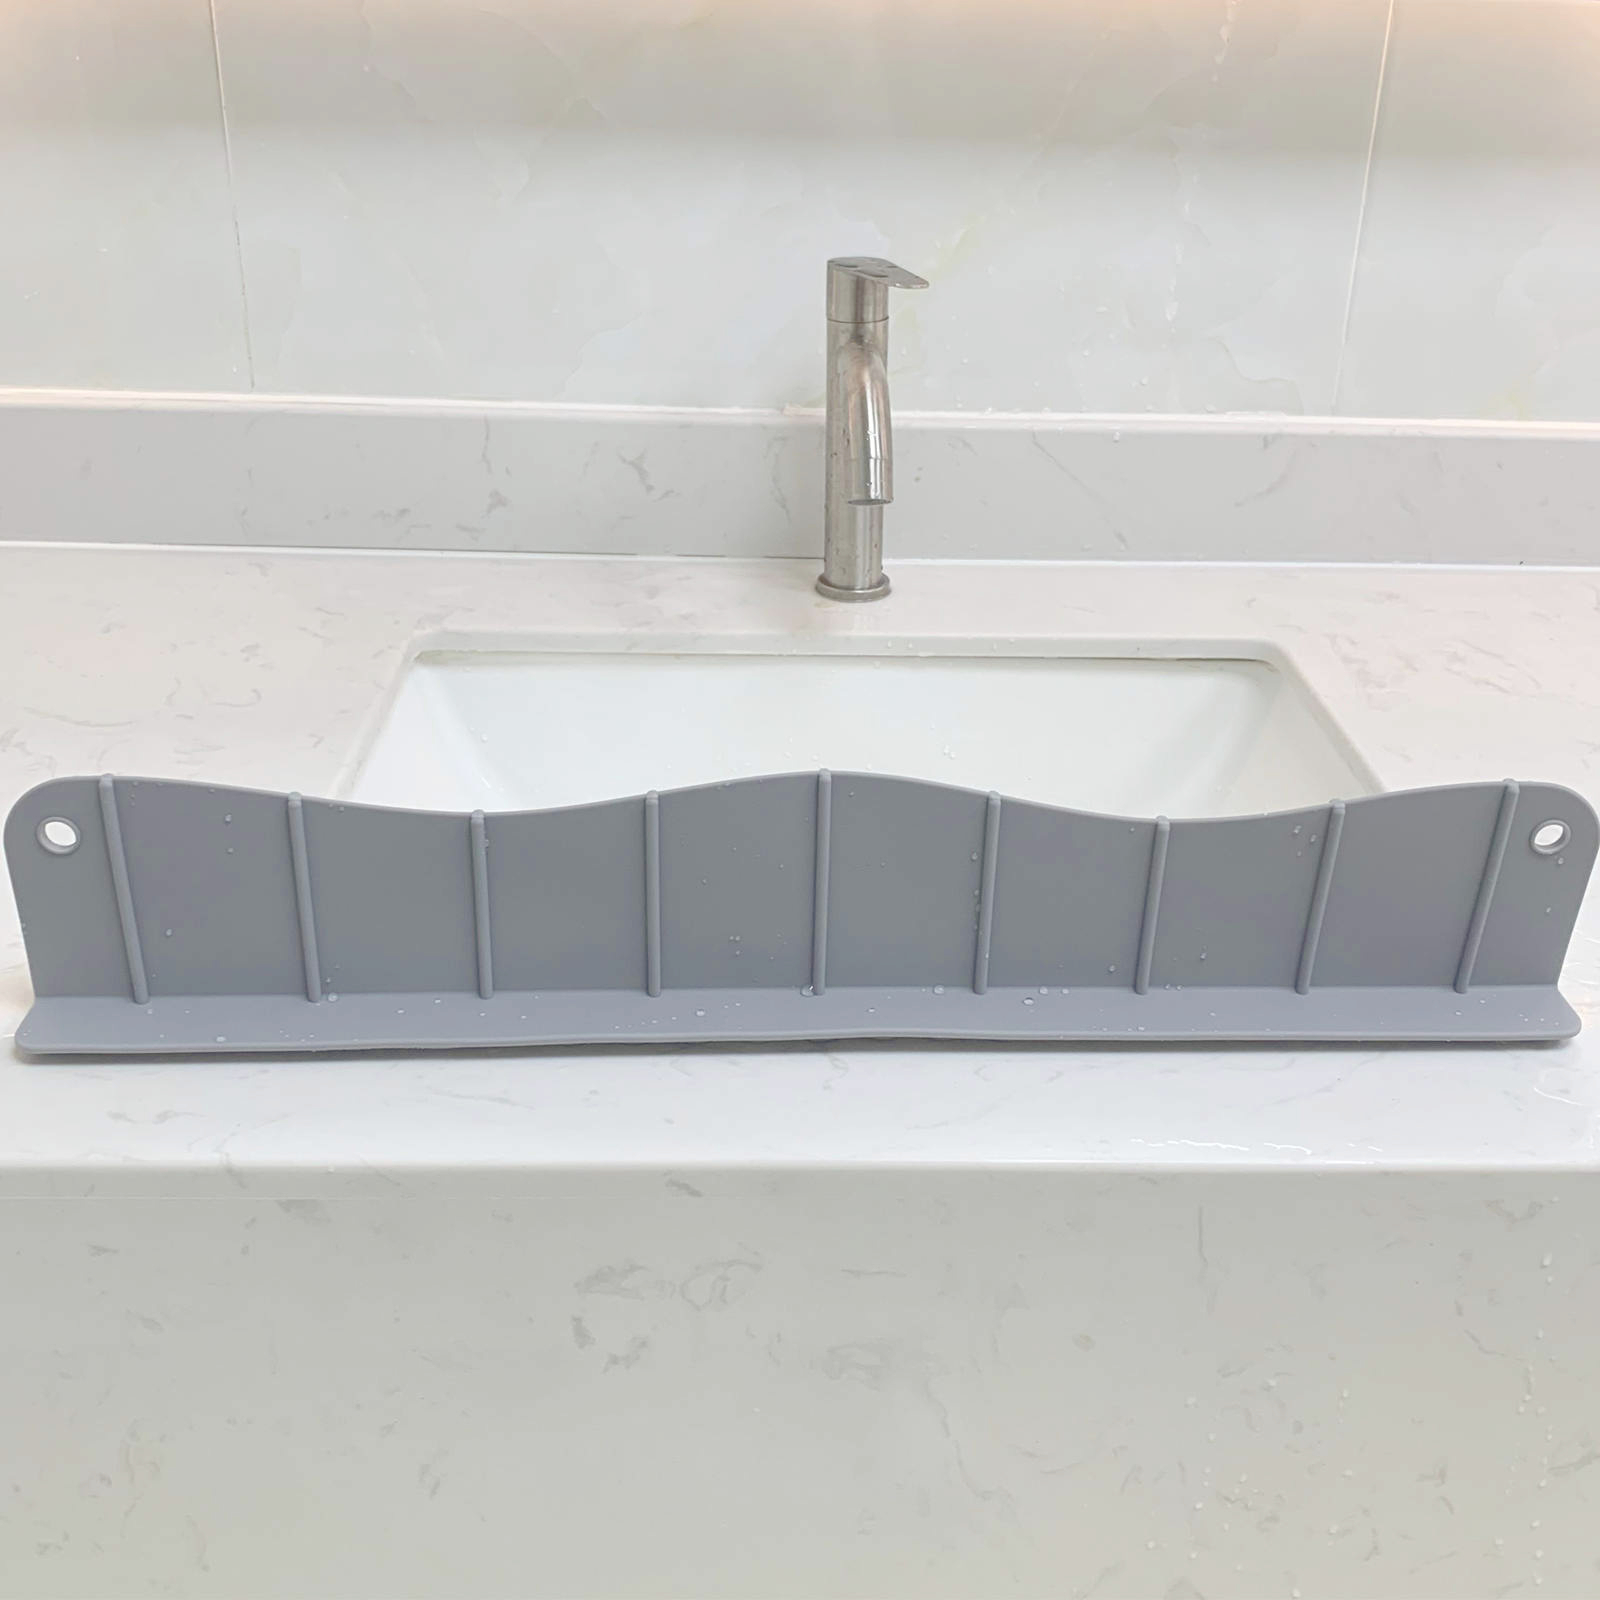 Red, Double SINK EDGE GUARD, Kitchen, Splash and Countertop